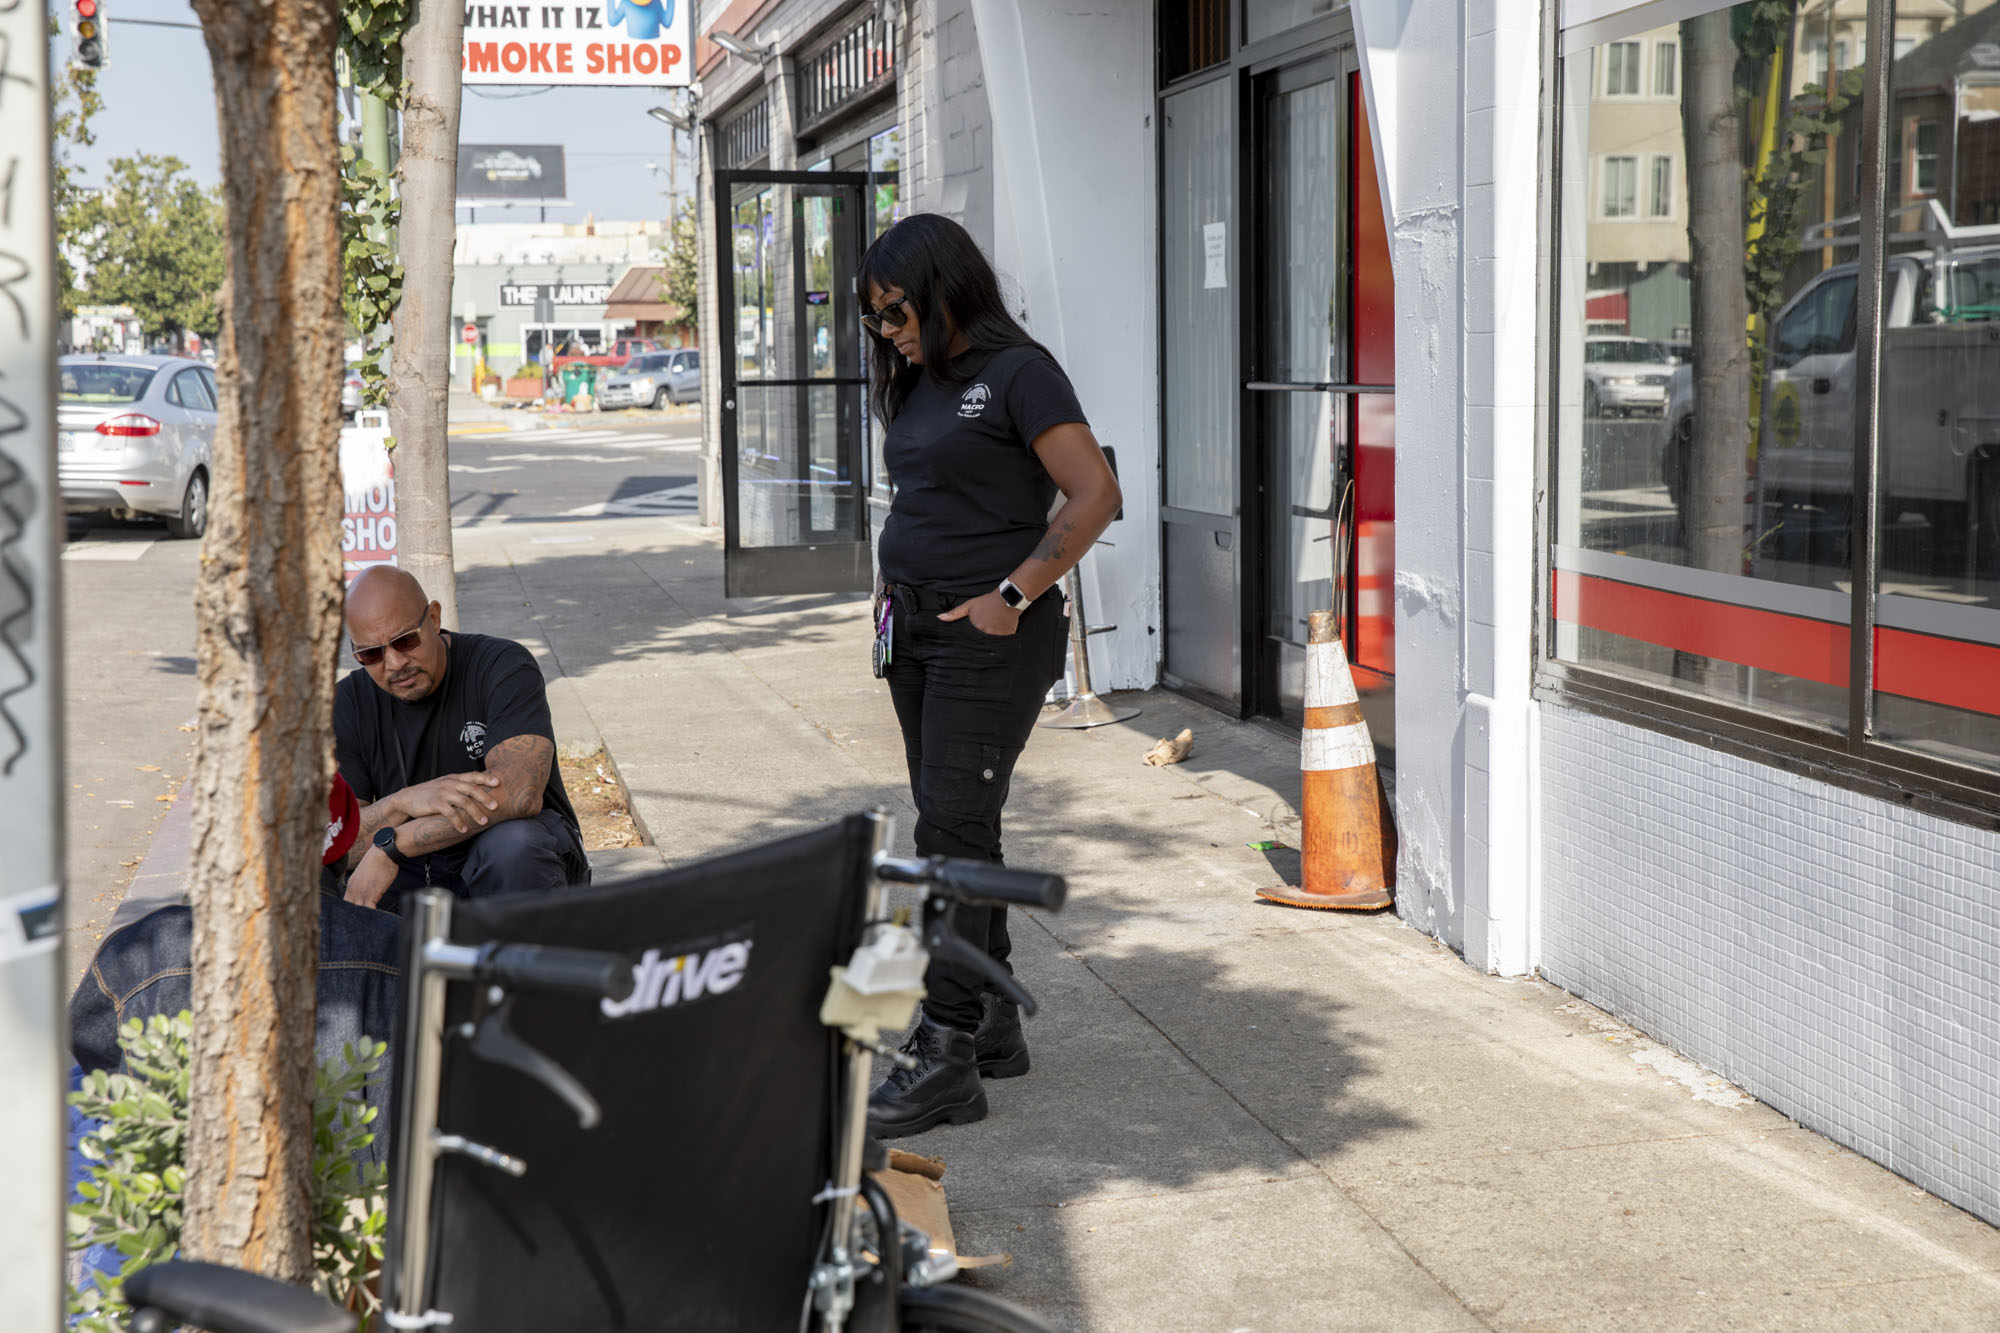 Two people en black shirts engage with a third unseen person sitting on a city sidewalk.